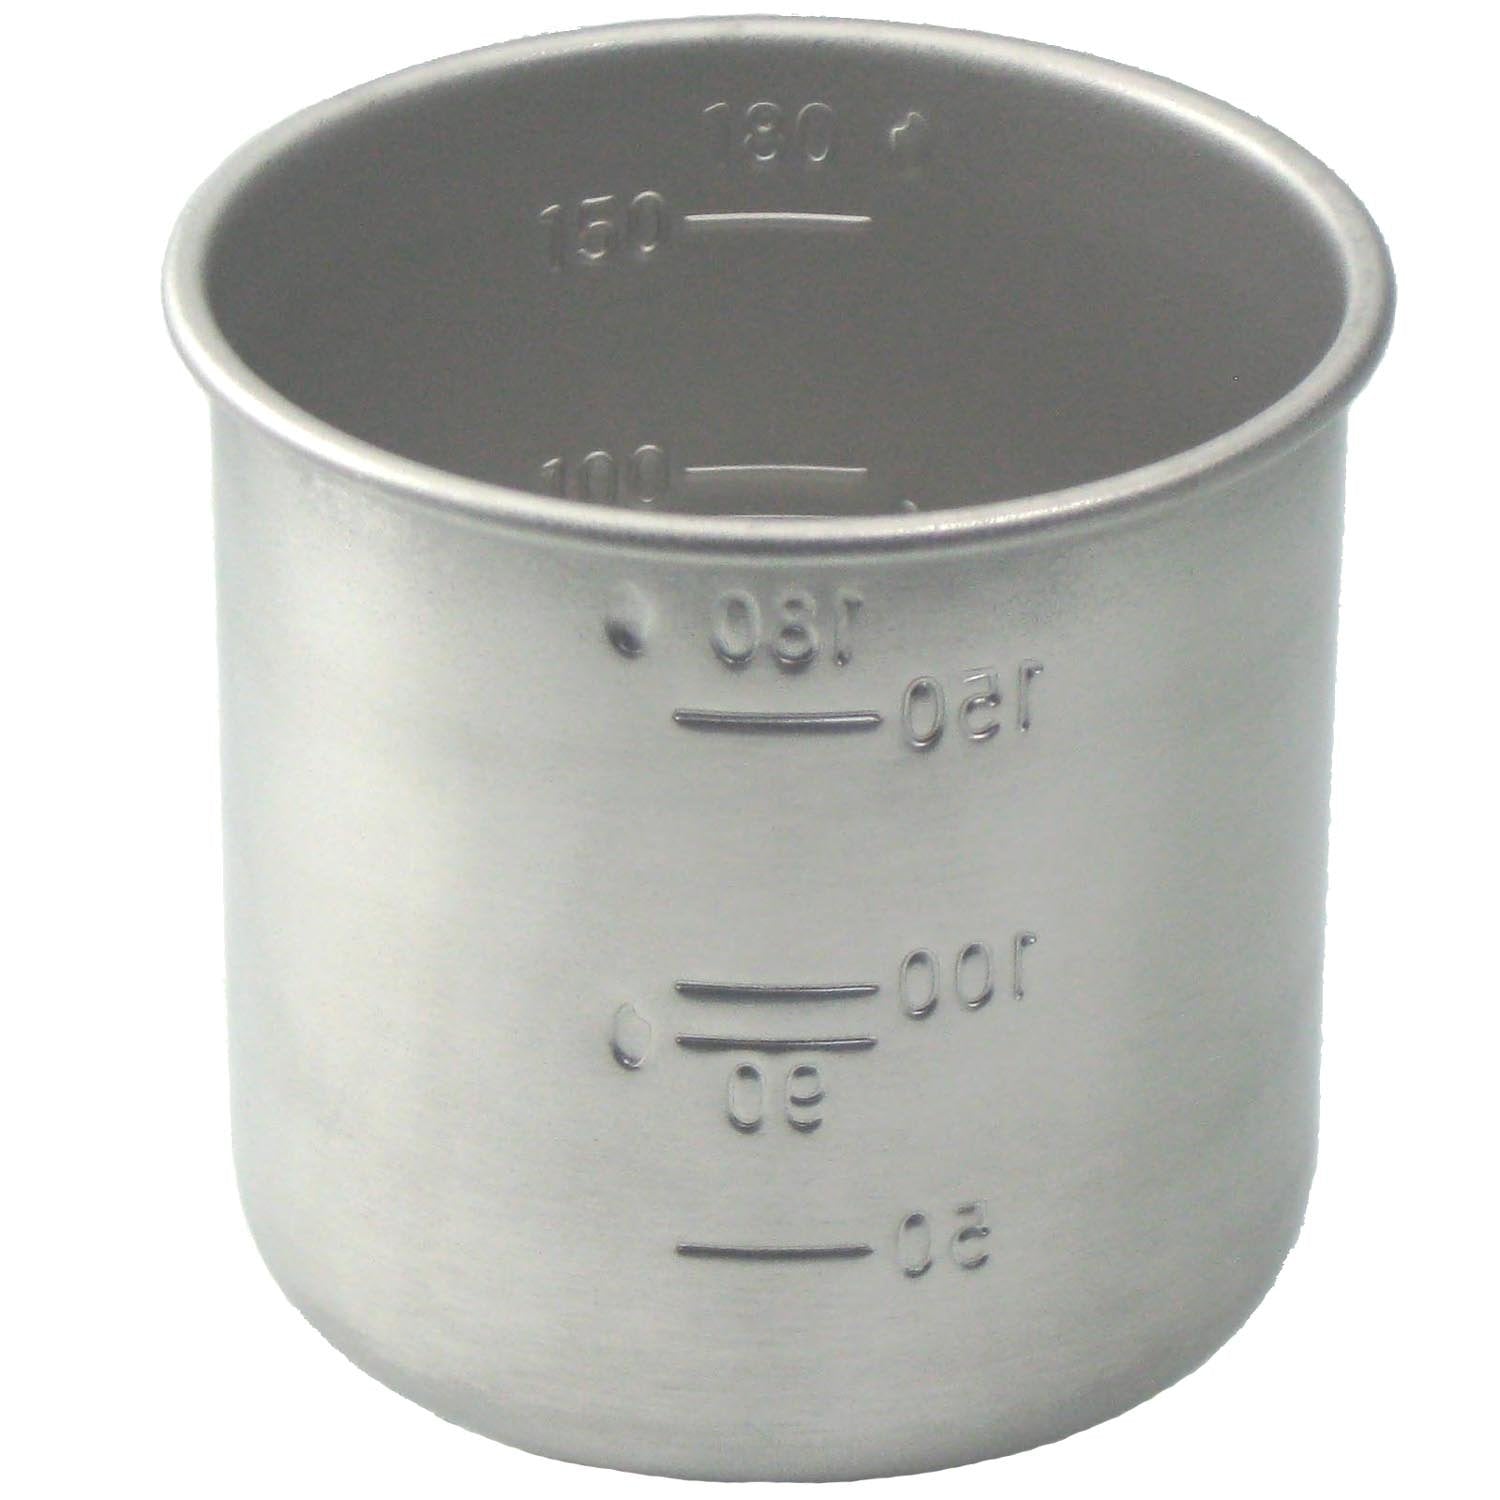 Stainless Steel Rice Measuring Cup 1 for Rice Cookers all Brands such as Aroma Zojirushi